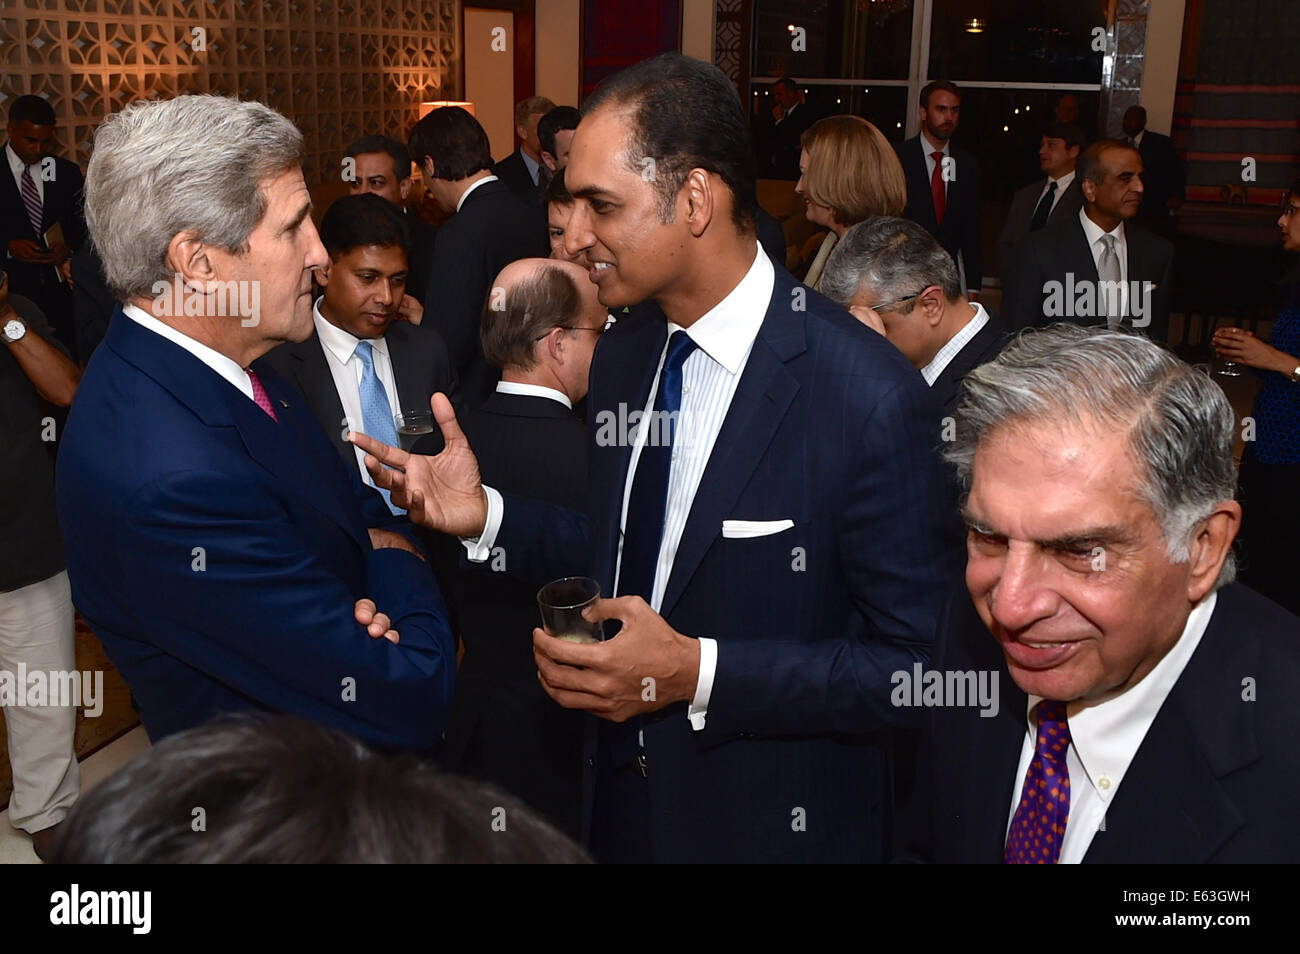 U.S. Secretary of State John Kerry chats with G.V. Sanjay Reddy, Vice Chairman of GVK Power and Infrastructure Limited, before a working dinner on July 30, 2014, with Indian and American businessmen at Roosevelt House - the U.S. Ambassador's Residence in Stock Photo